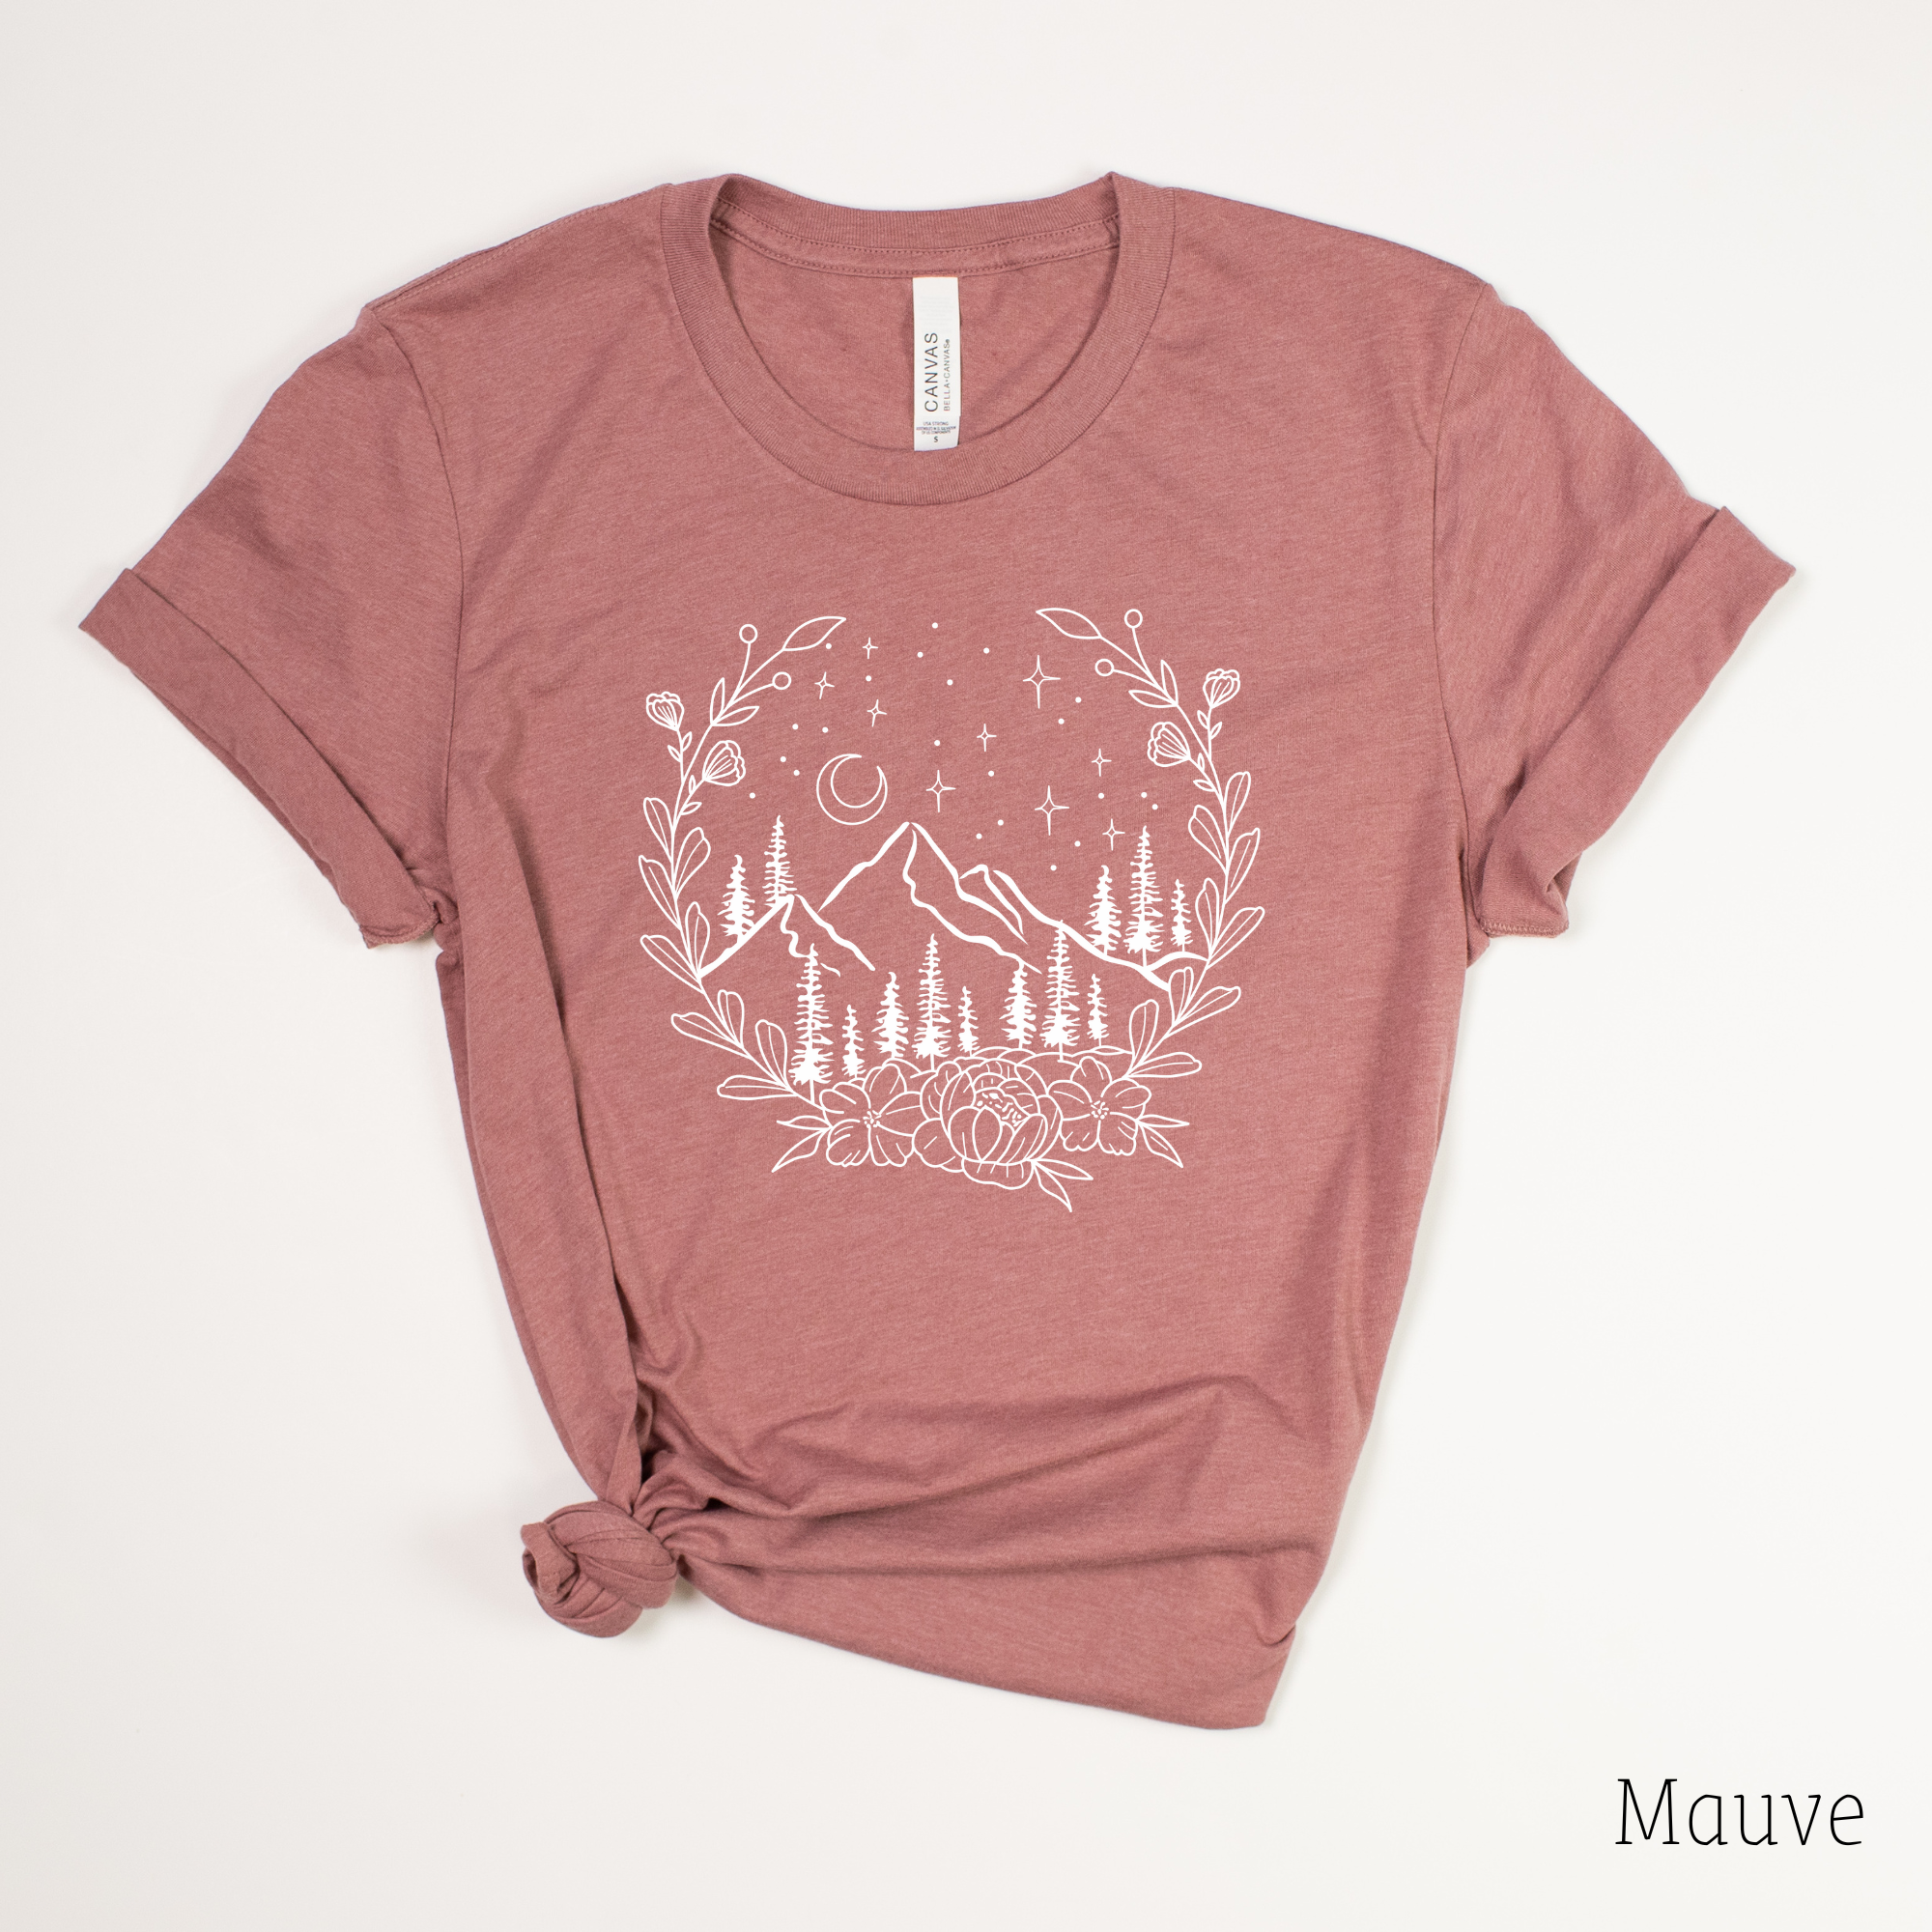 Mountain TShirt, Graphic Tee Nature, Floral Shirts *UNISEX FIT*-208 Tees Wholesale, Idaho